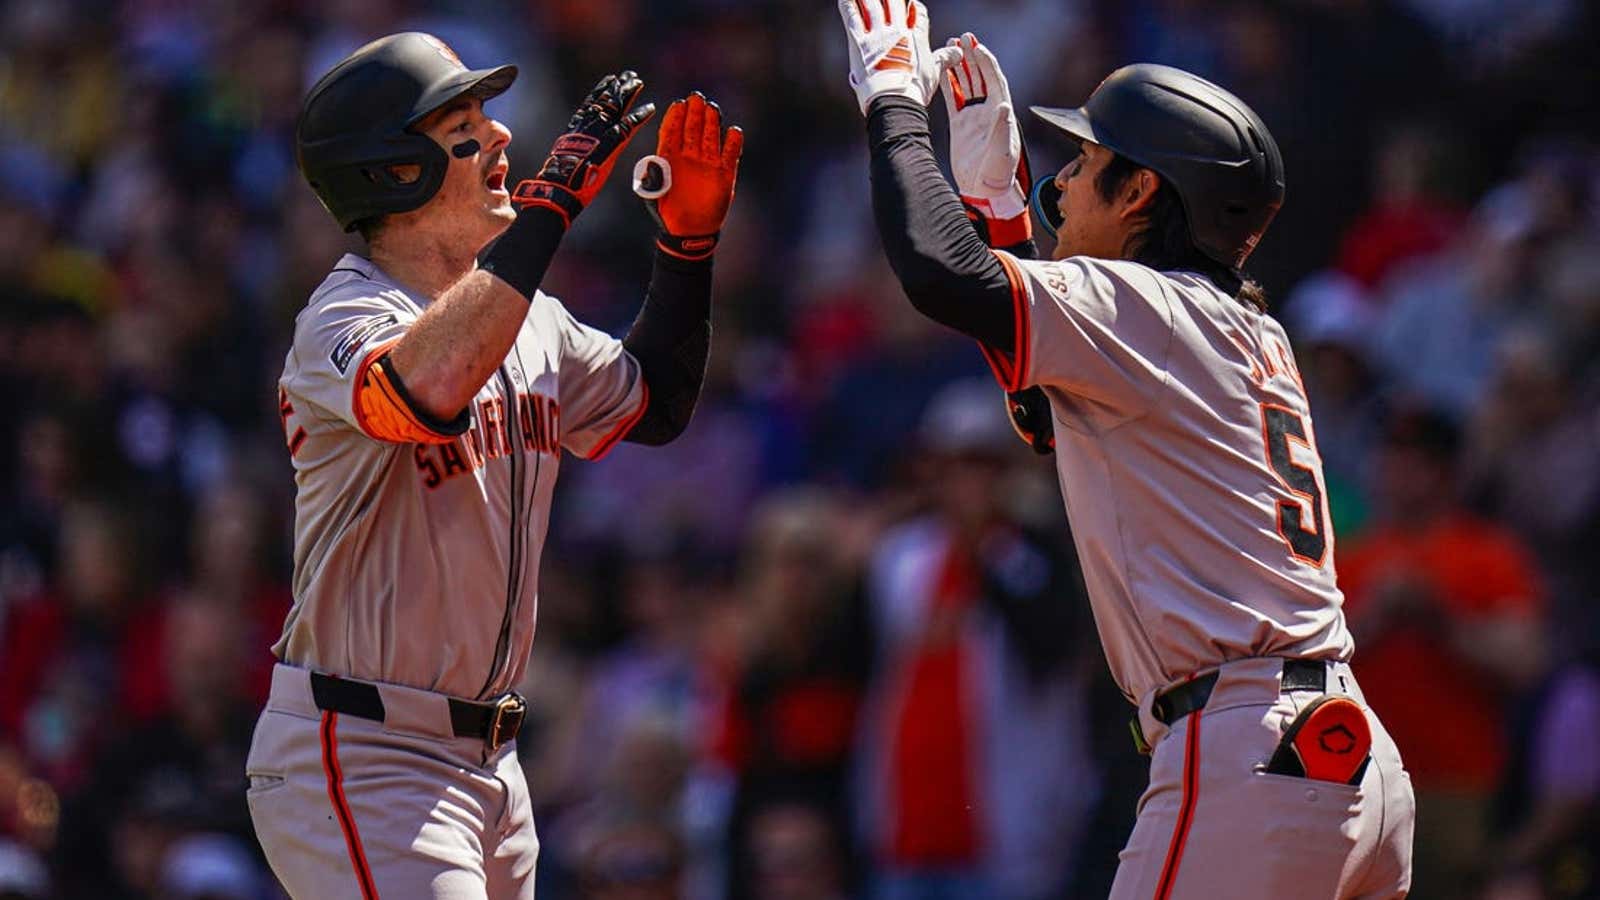 Image for Yaz sir: Grandson's HR helps Giants past Red Sox